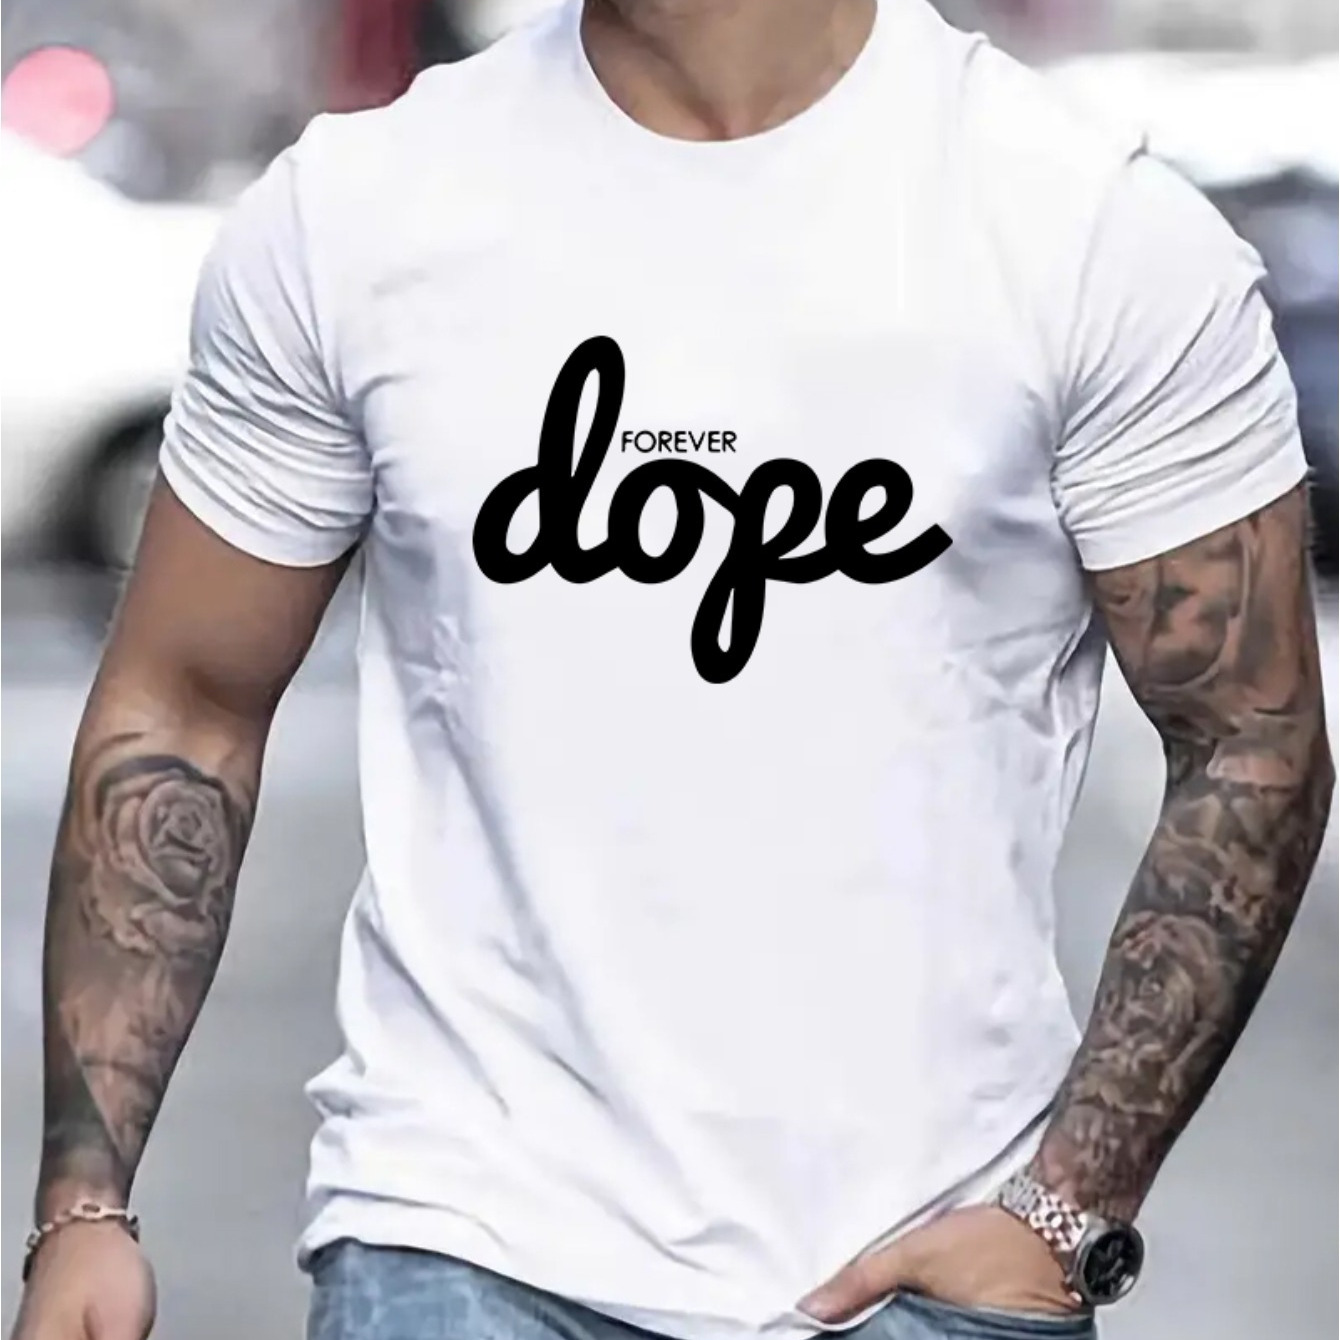 

Dope Forever Print, Men's Novel Graphic Design T-shirt, Casual Comfy Tees For Summer, Men's Clothing Tops For Daily Activities